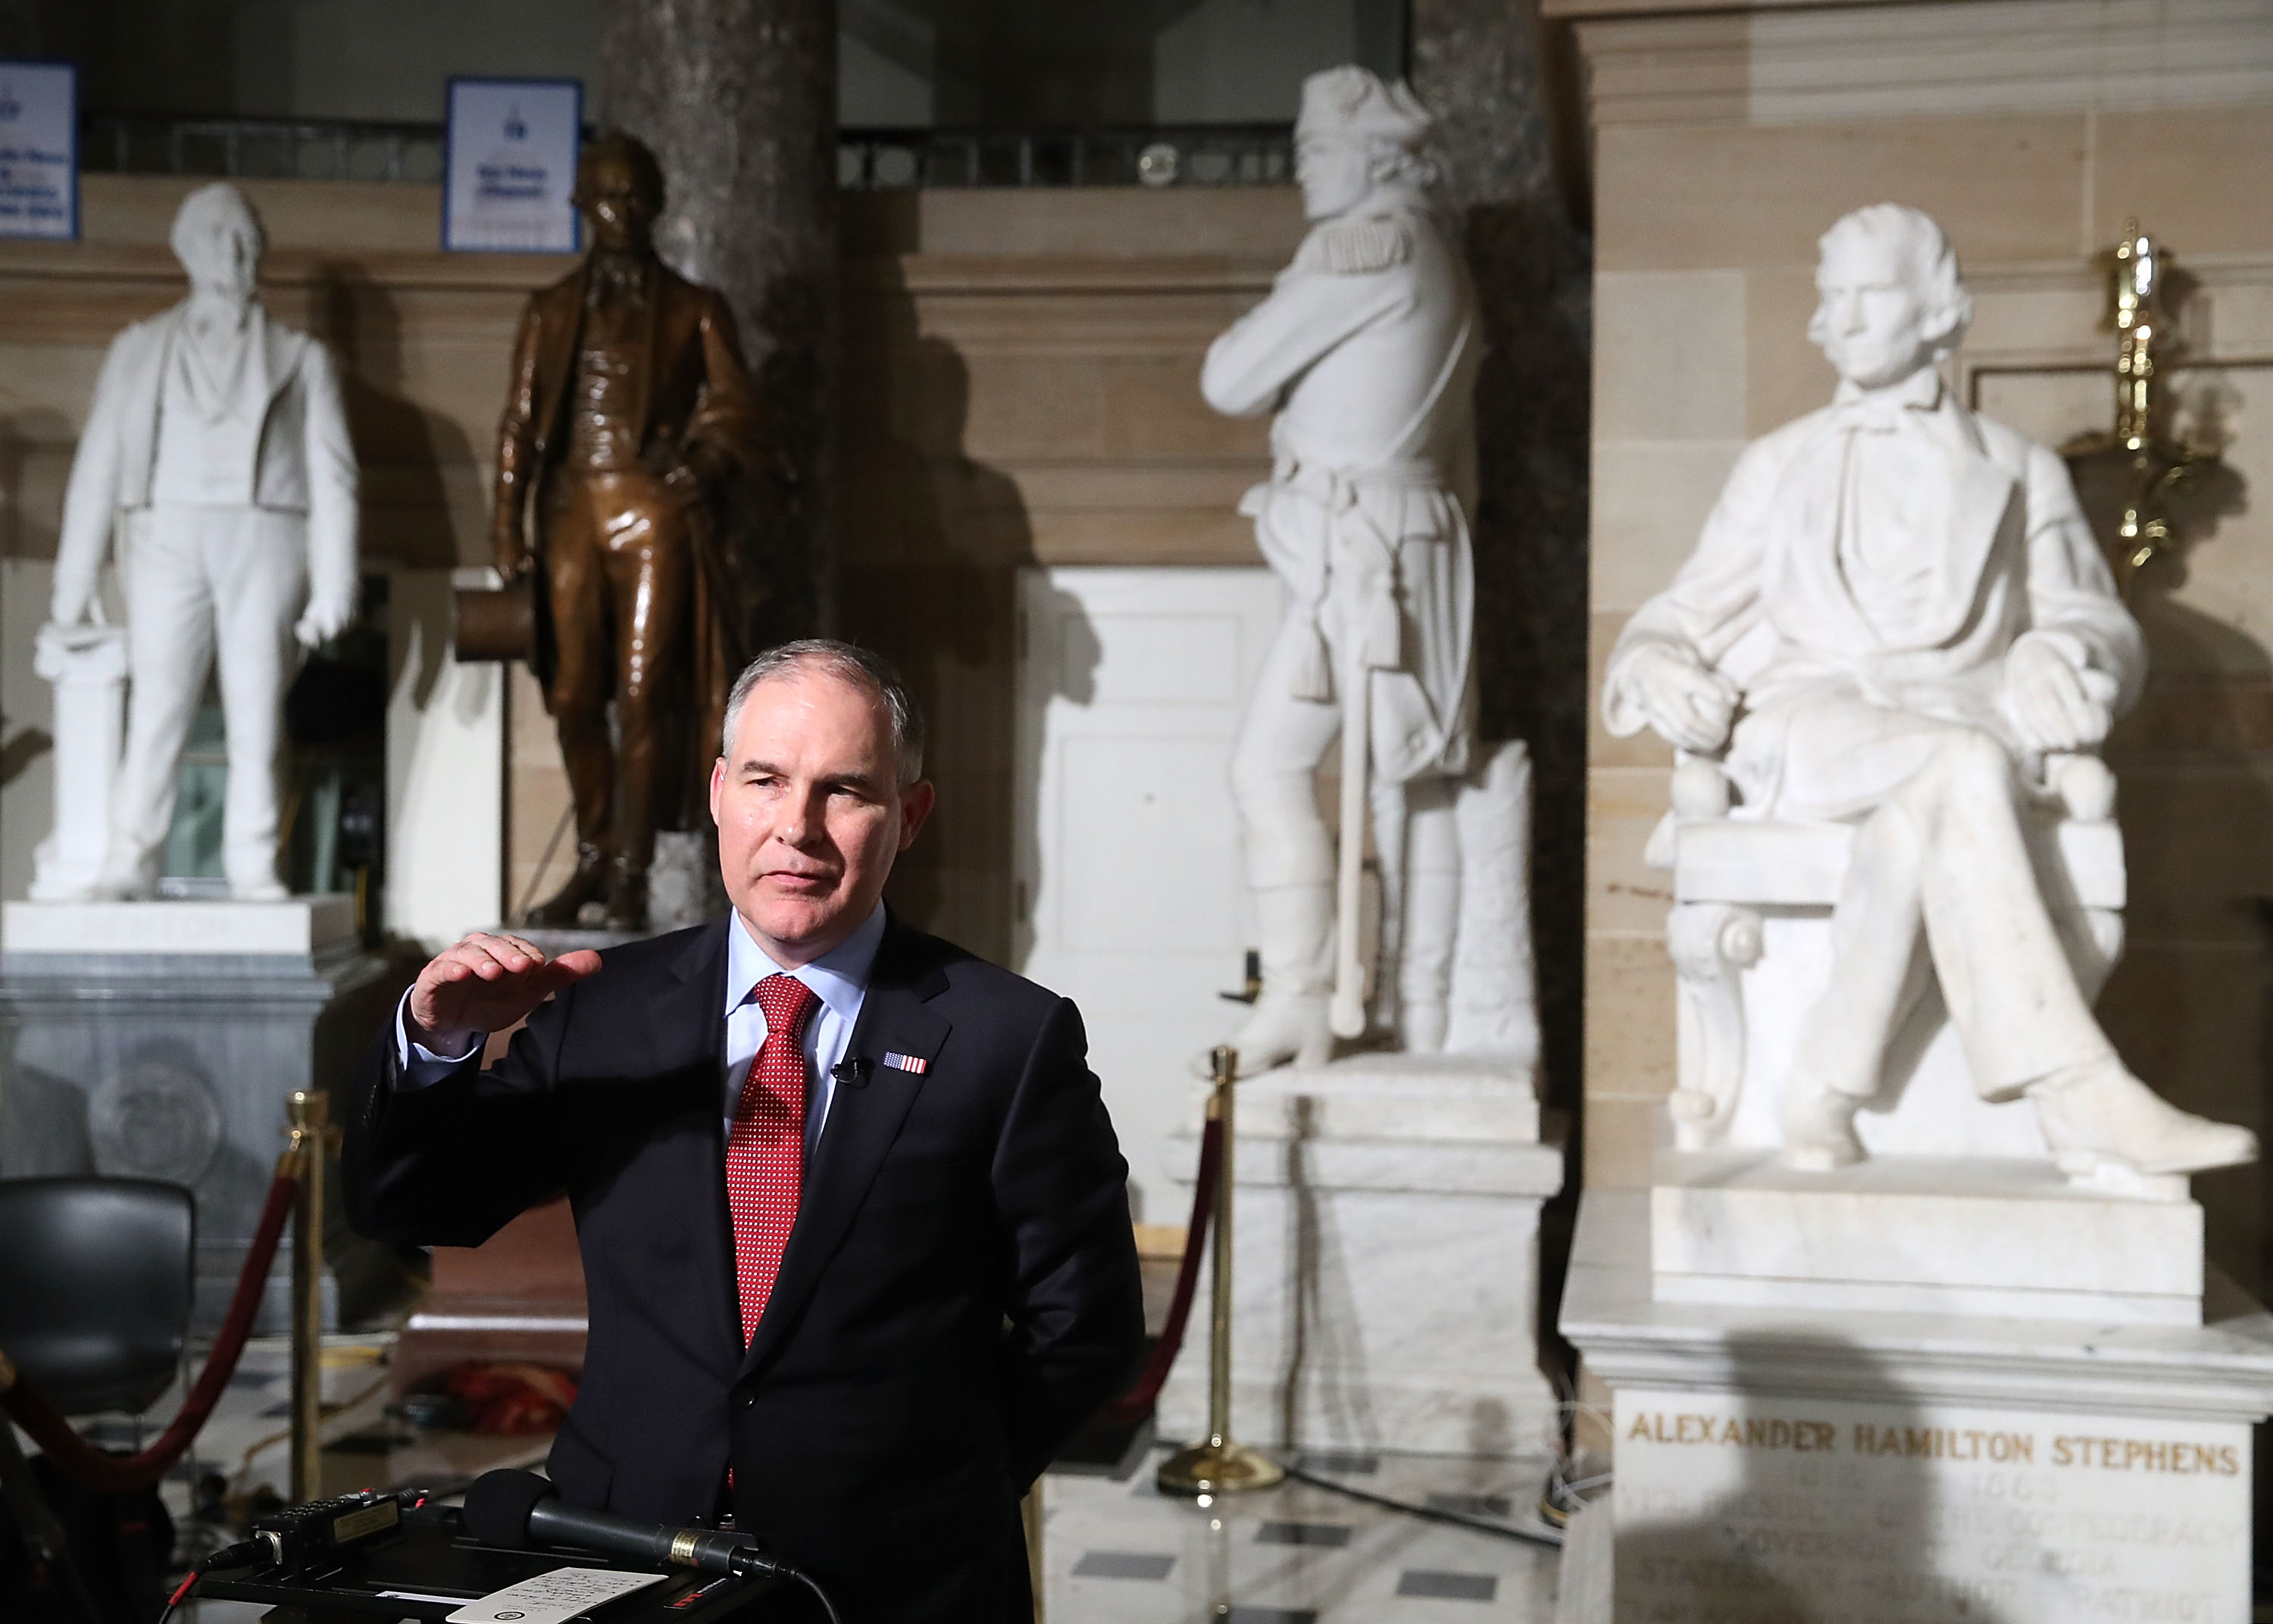 EPA Administrator Scott Pruitt does a television interview in Statuary Hall at the U.S. Capitol before President Donald Trump delivers a speech to a joint session of Congress on February 28, 2017 in Washington, D.C. (Mark Wilson—Getty Images)